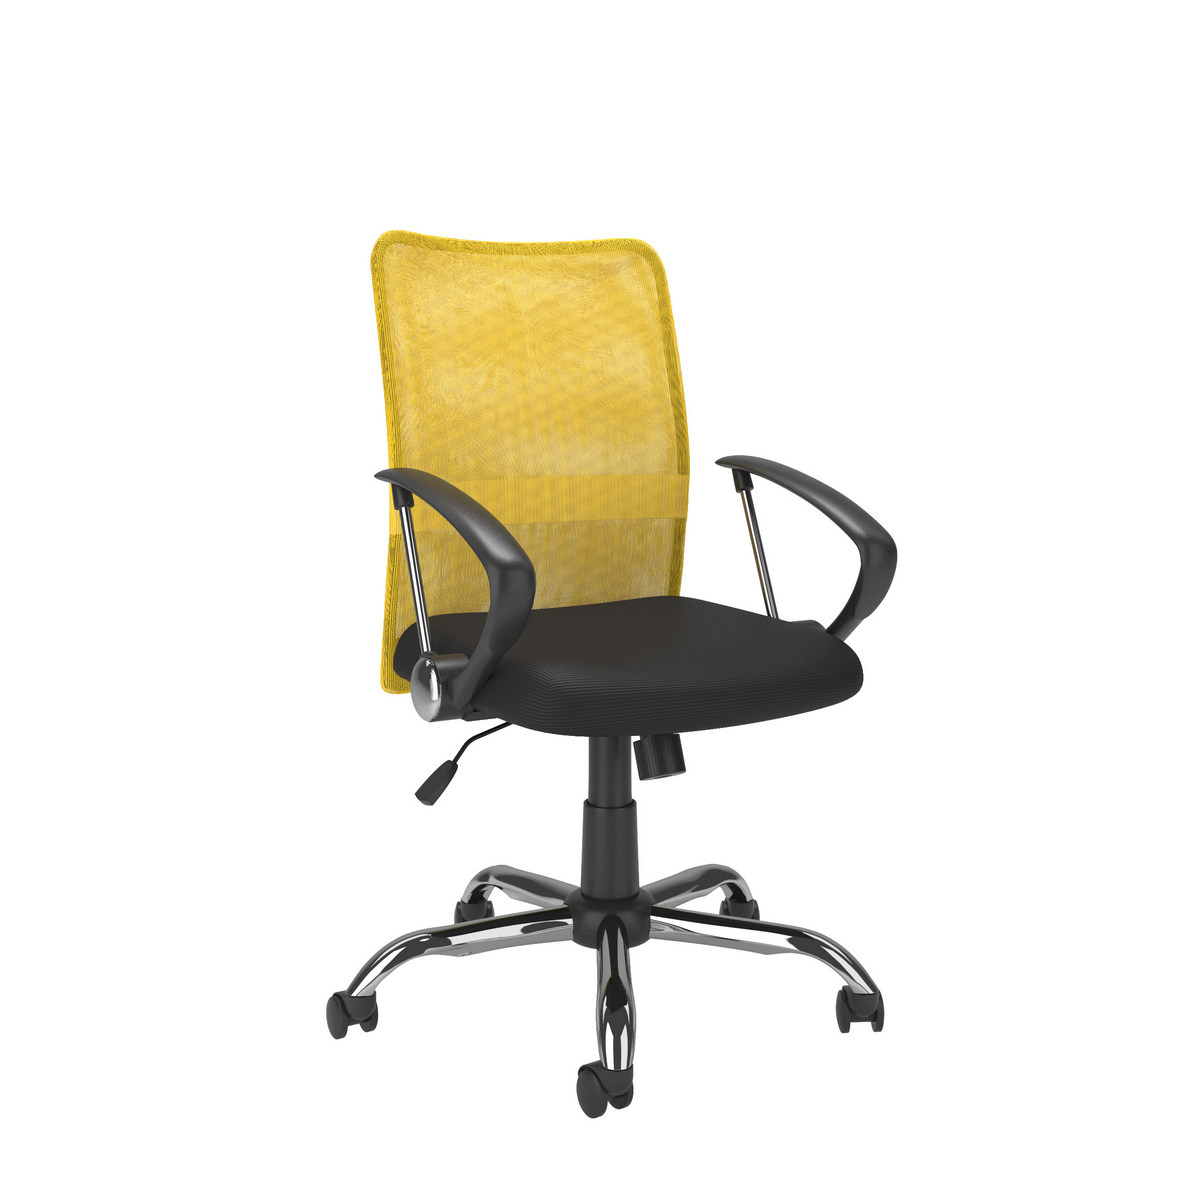 Corliving Whl-719-c Workspace Office Chair W/ Contoured Yellow Mesh Back